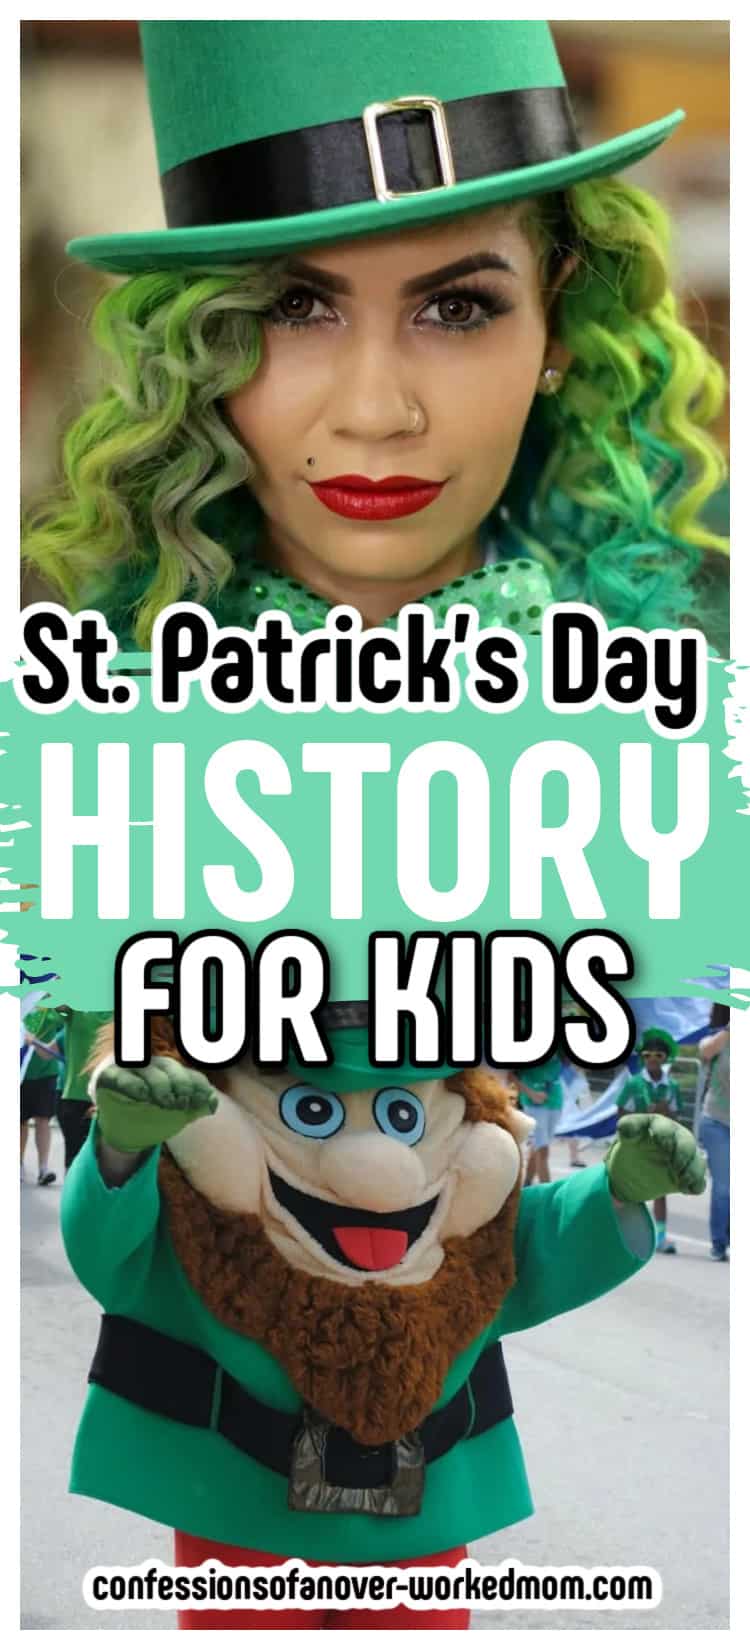 St Patricks Day history for kids doesn’t have to be all rainbows and gold. Learn the St Patrick’s Day history for elementary students.